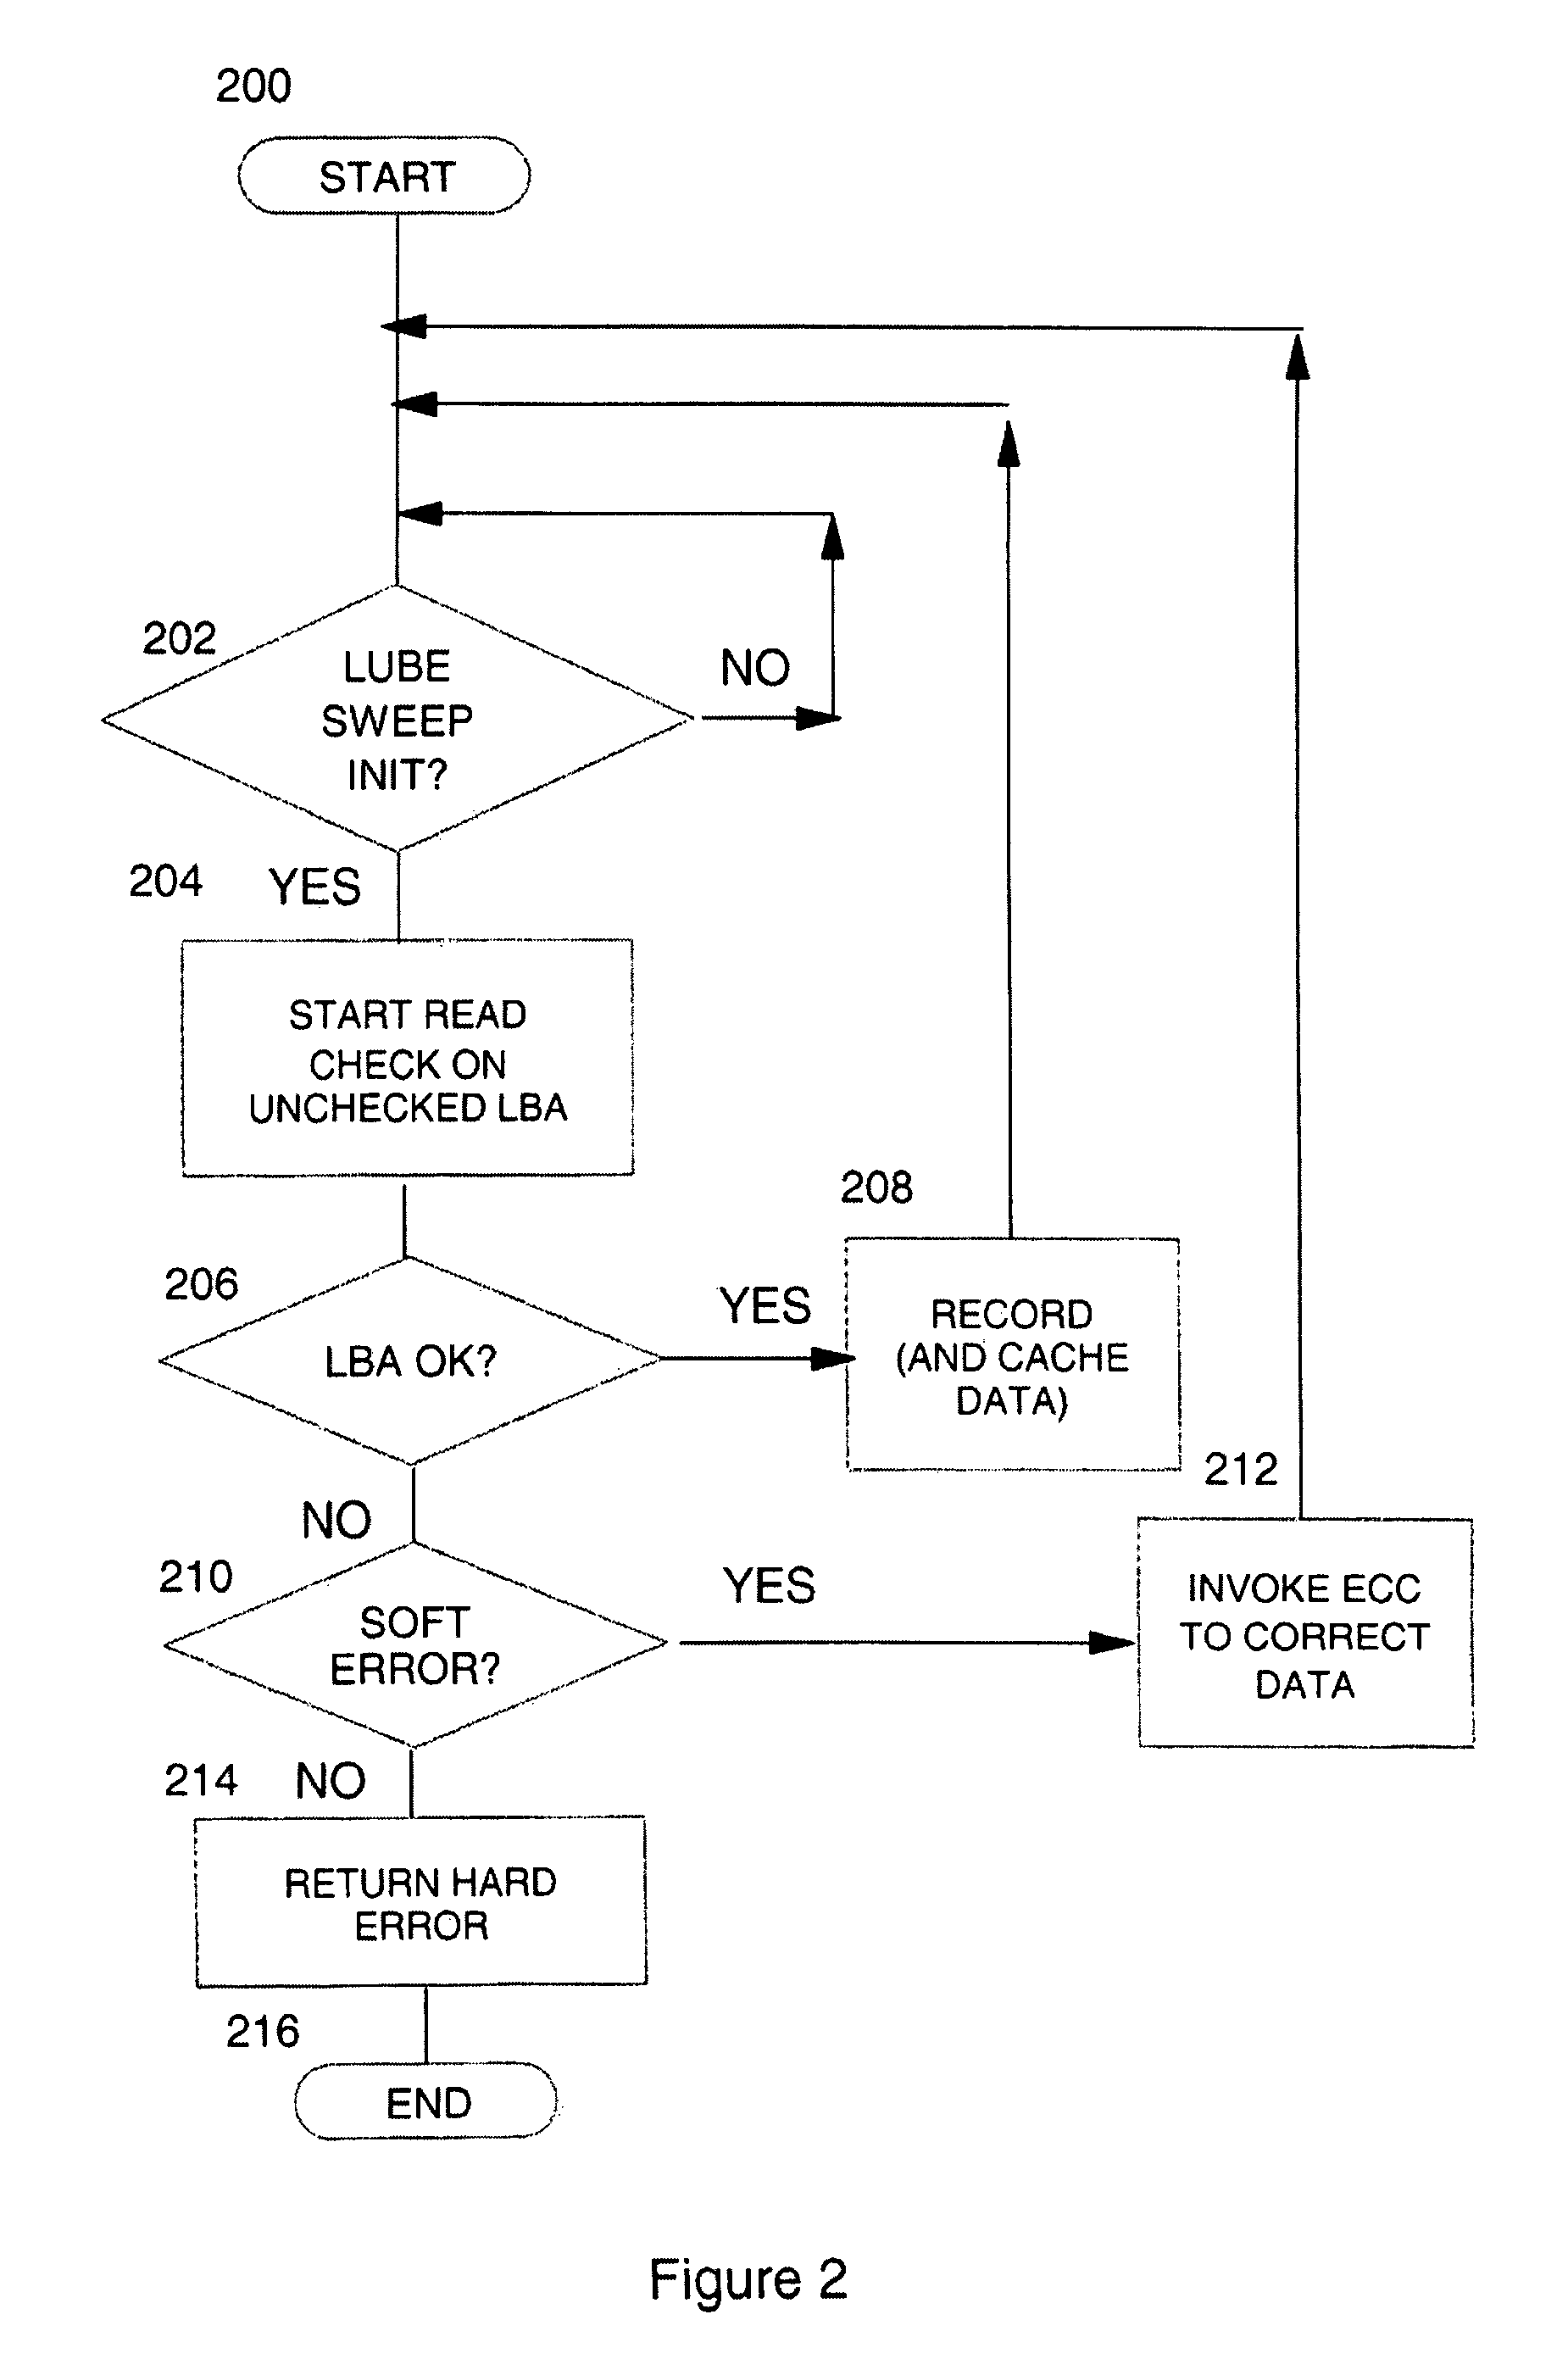 Apparatus and method for disk read checking